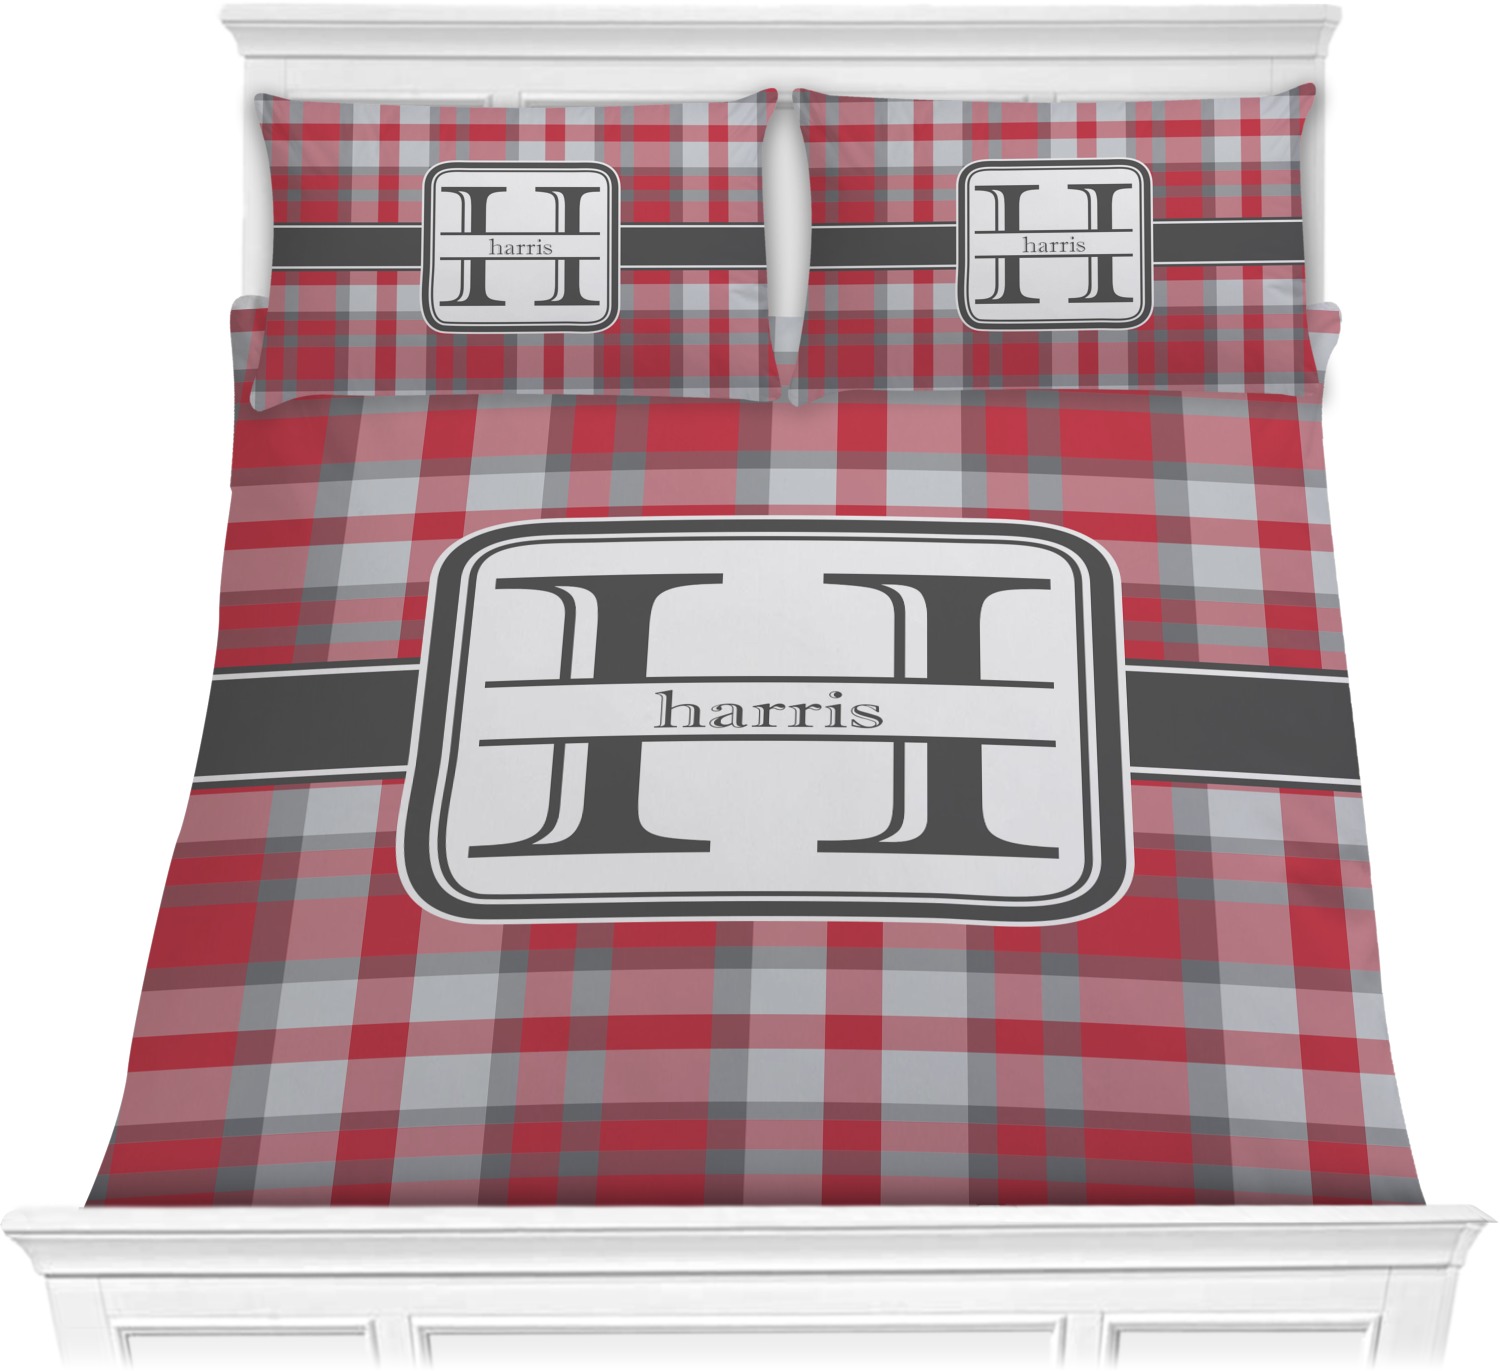 Red and Black Check Geometric Checker Plaid Pattern Printed Plaid Comforter Set Soft Microfiber Bedding Wake In Cloud 3pcs, King Size 